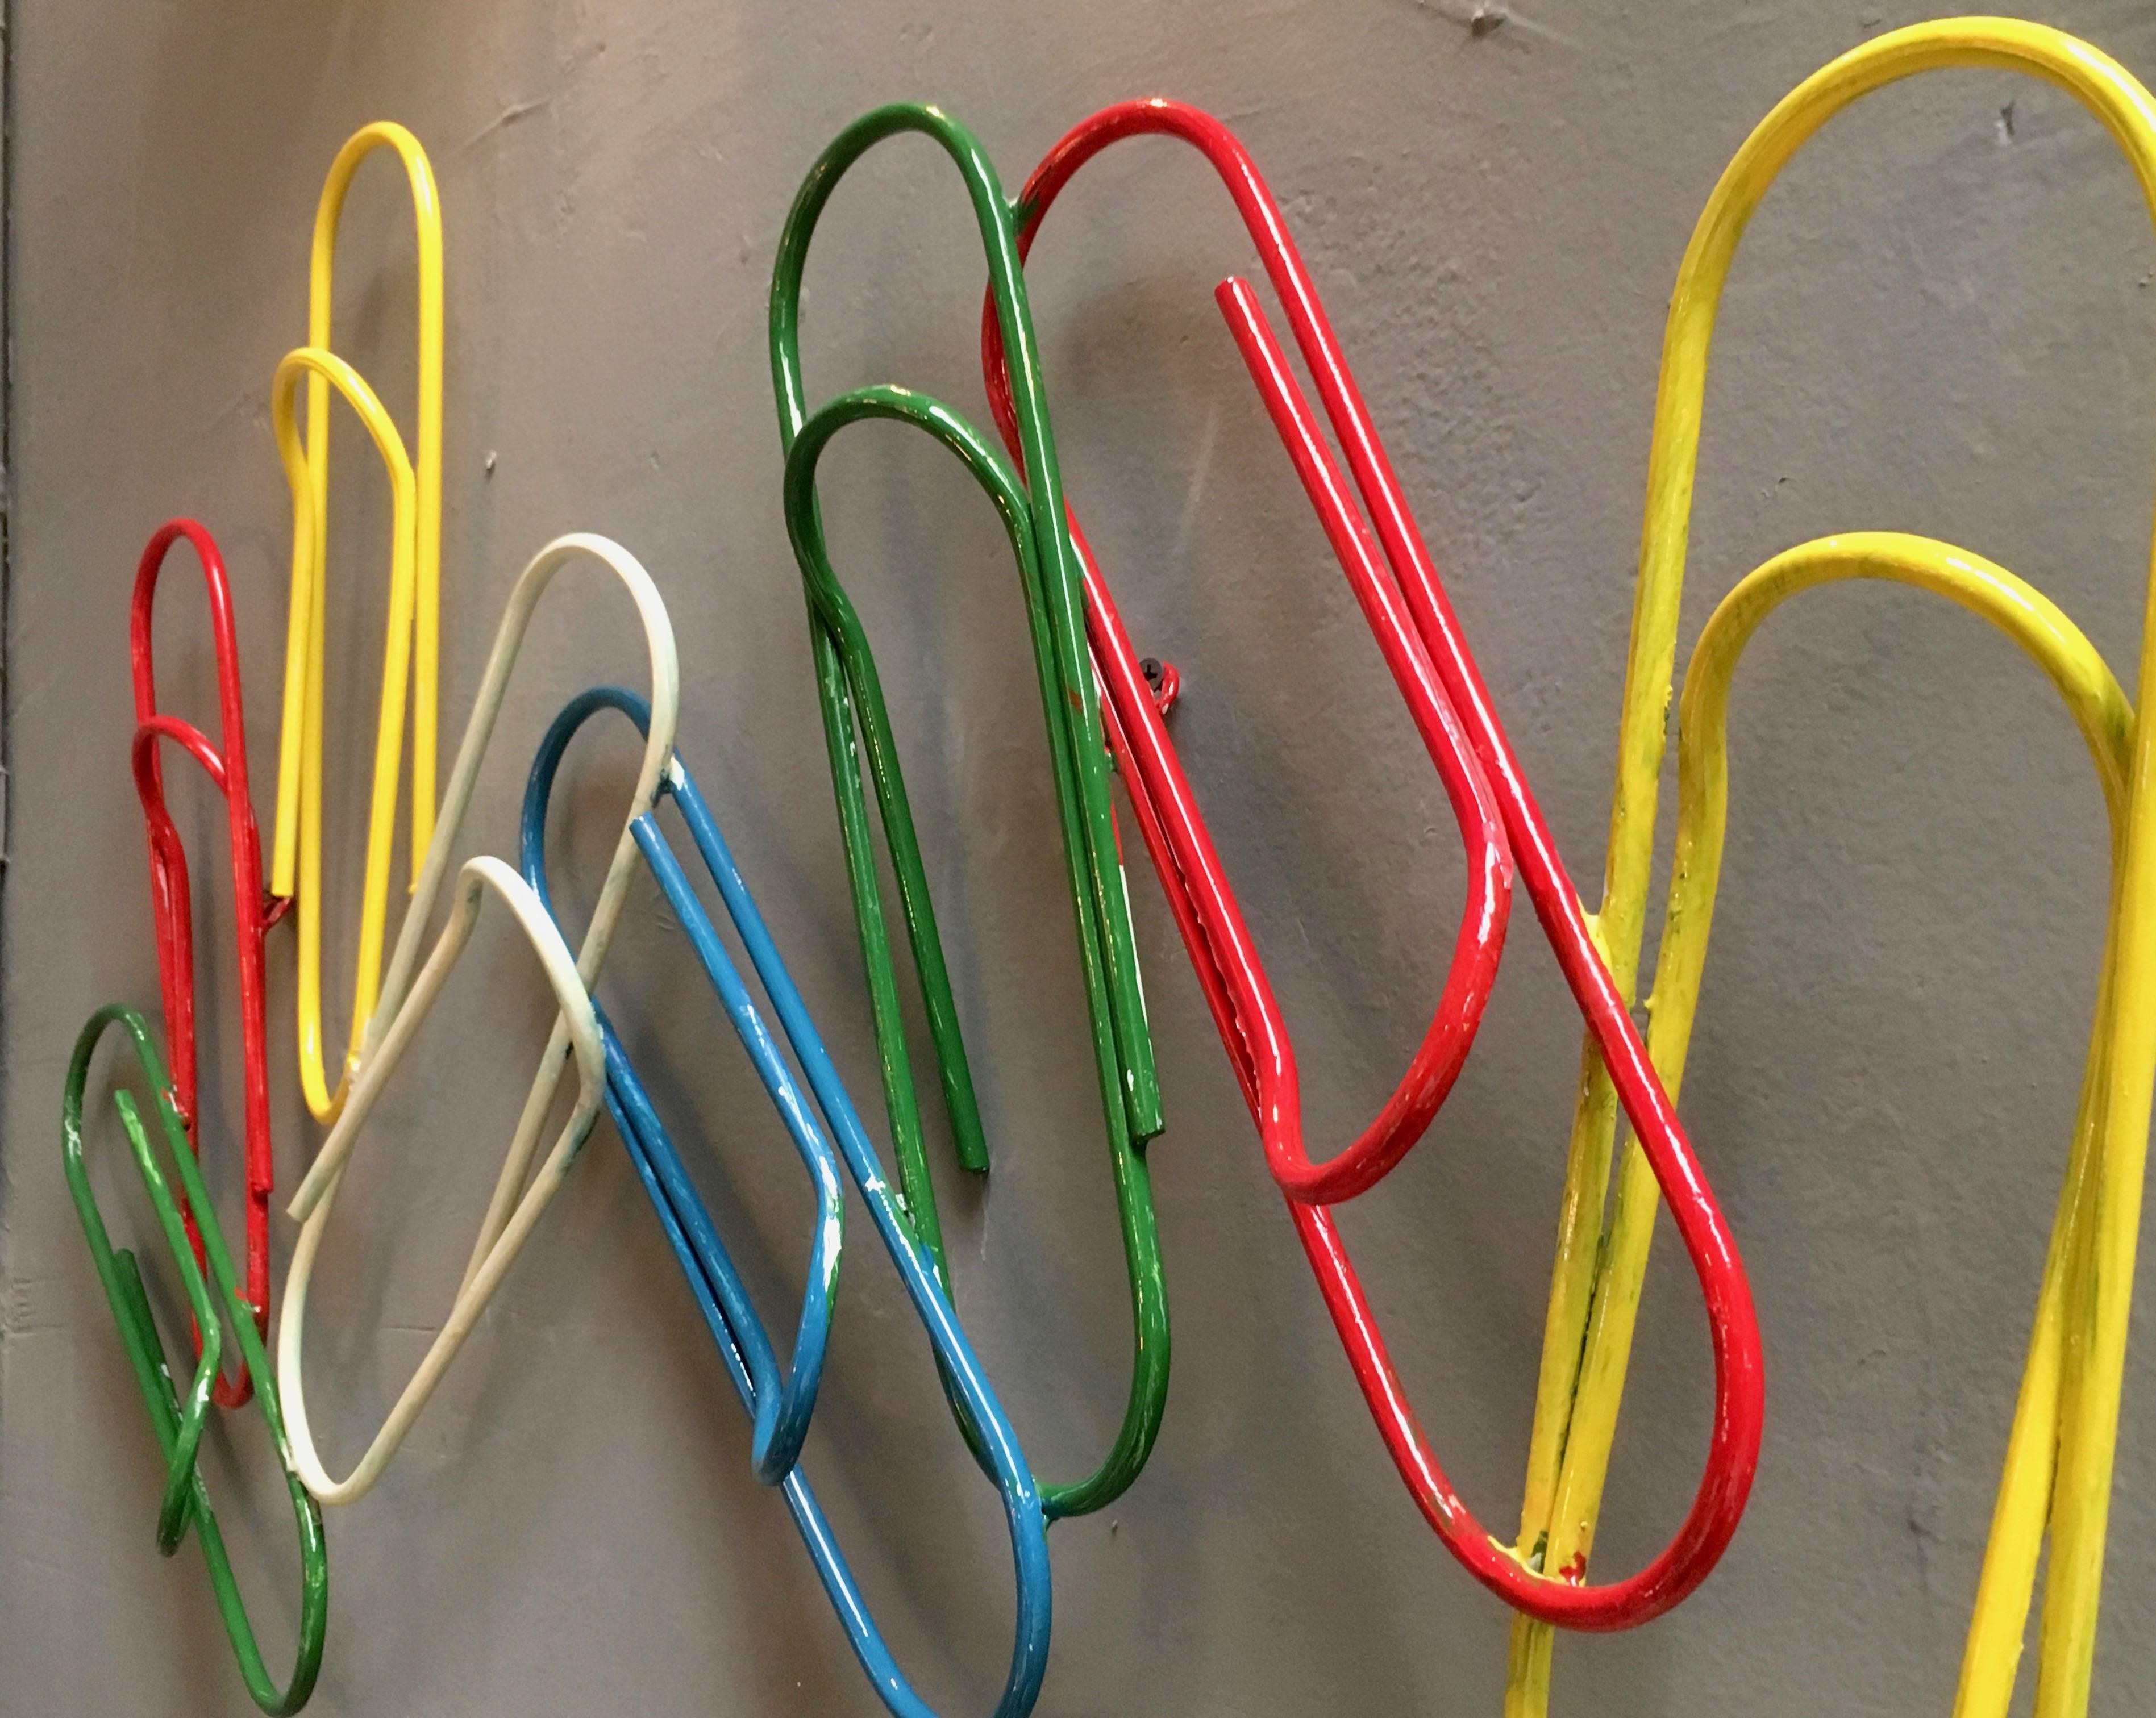 3 foot long metal coat rack of oversized paperclips from France. Eight painted paperclips soldered together. Very fun piece of art. Great piece of usable pop art.